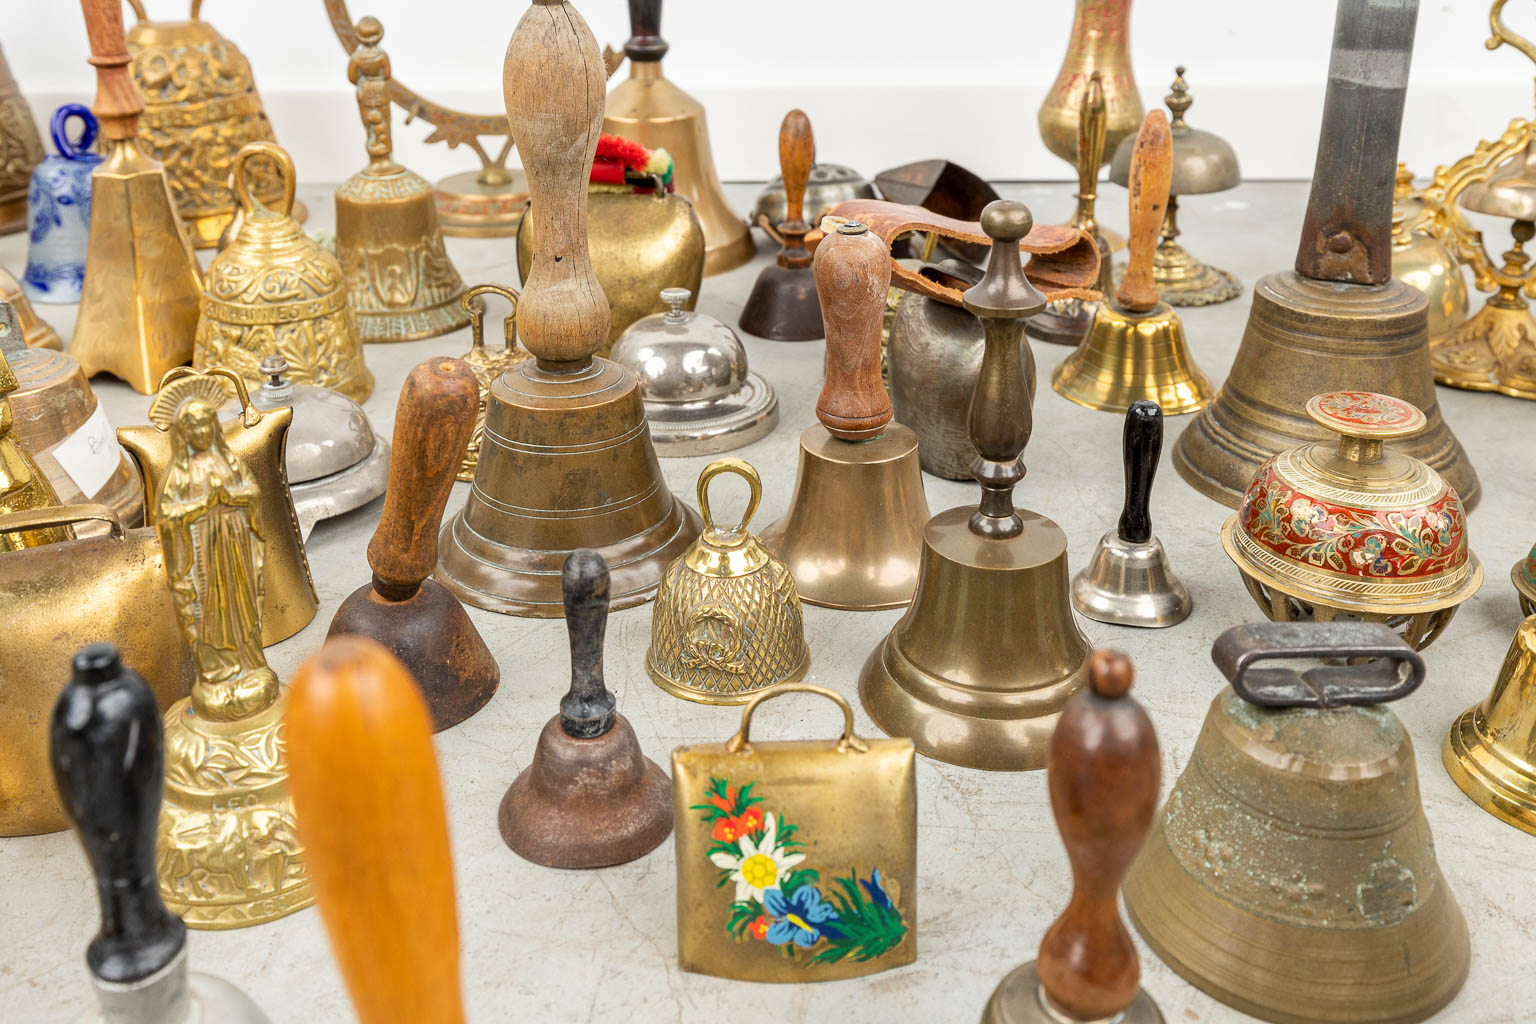 A large collection of table bells made of bronze and metal. 